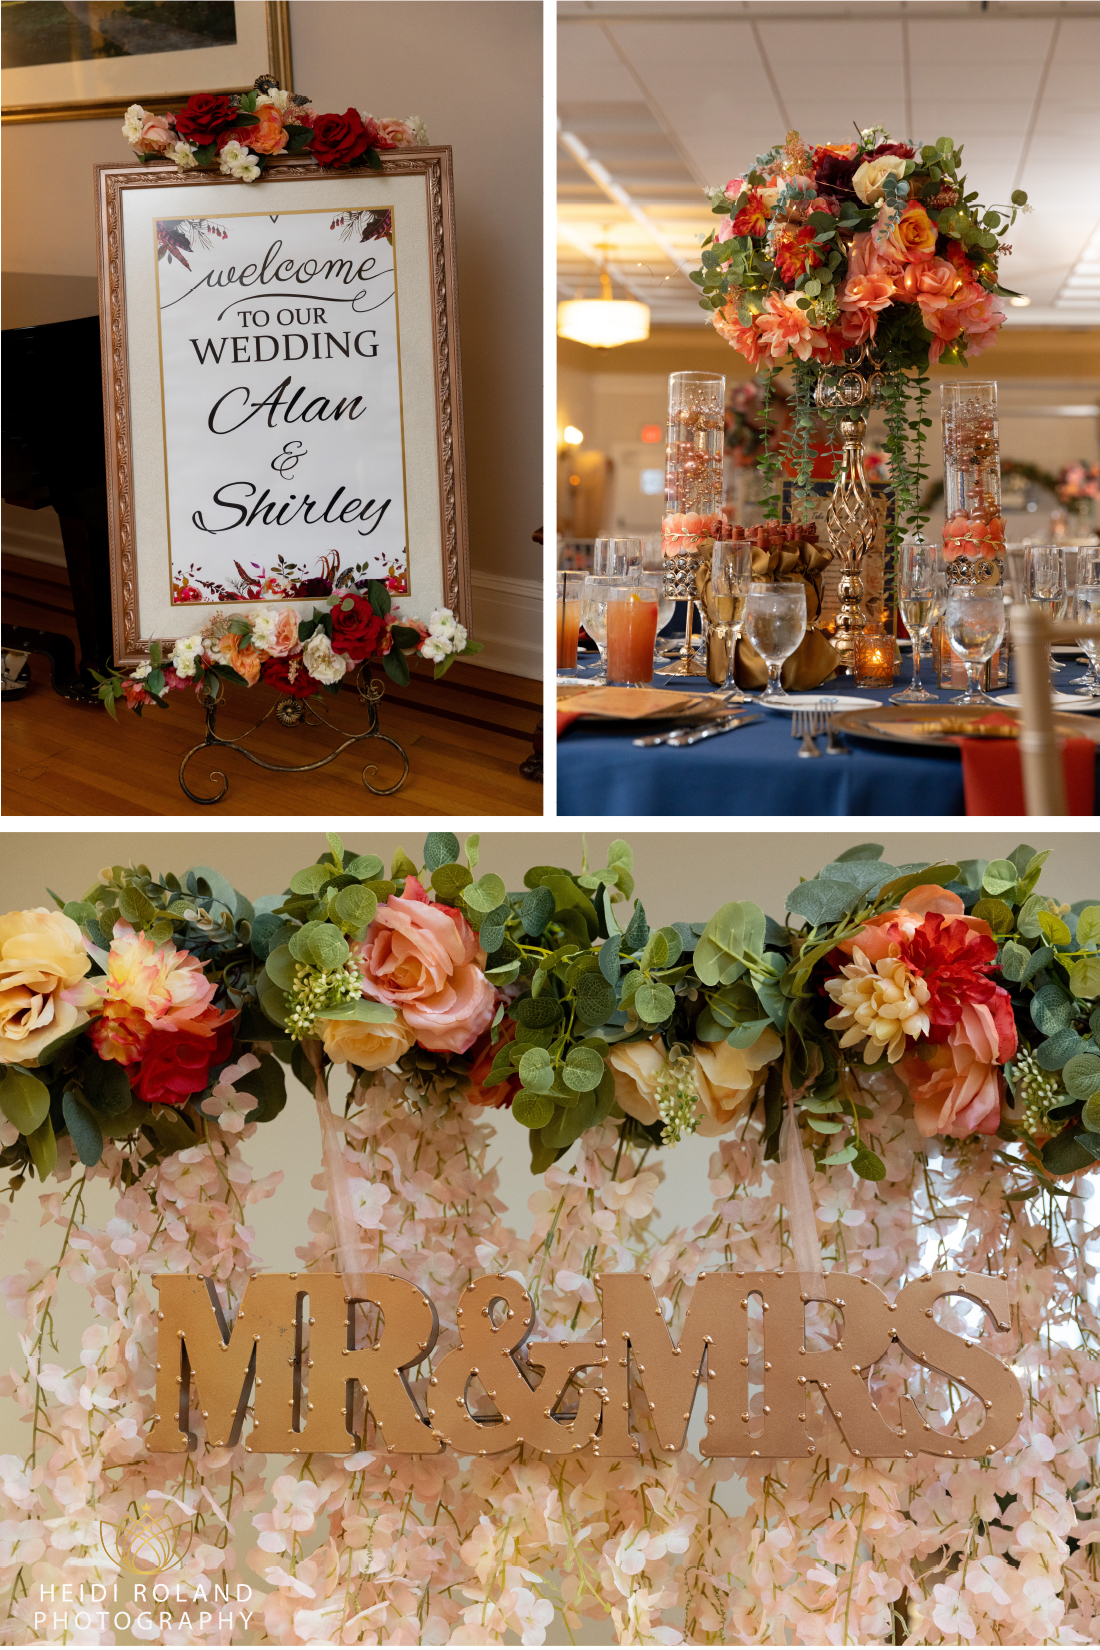 University and Whist Club Wedding reception signs and details